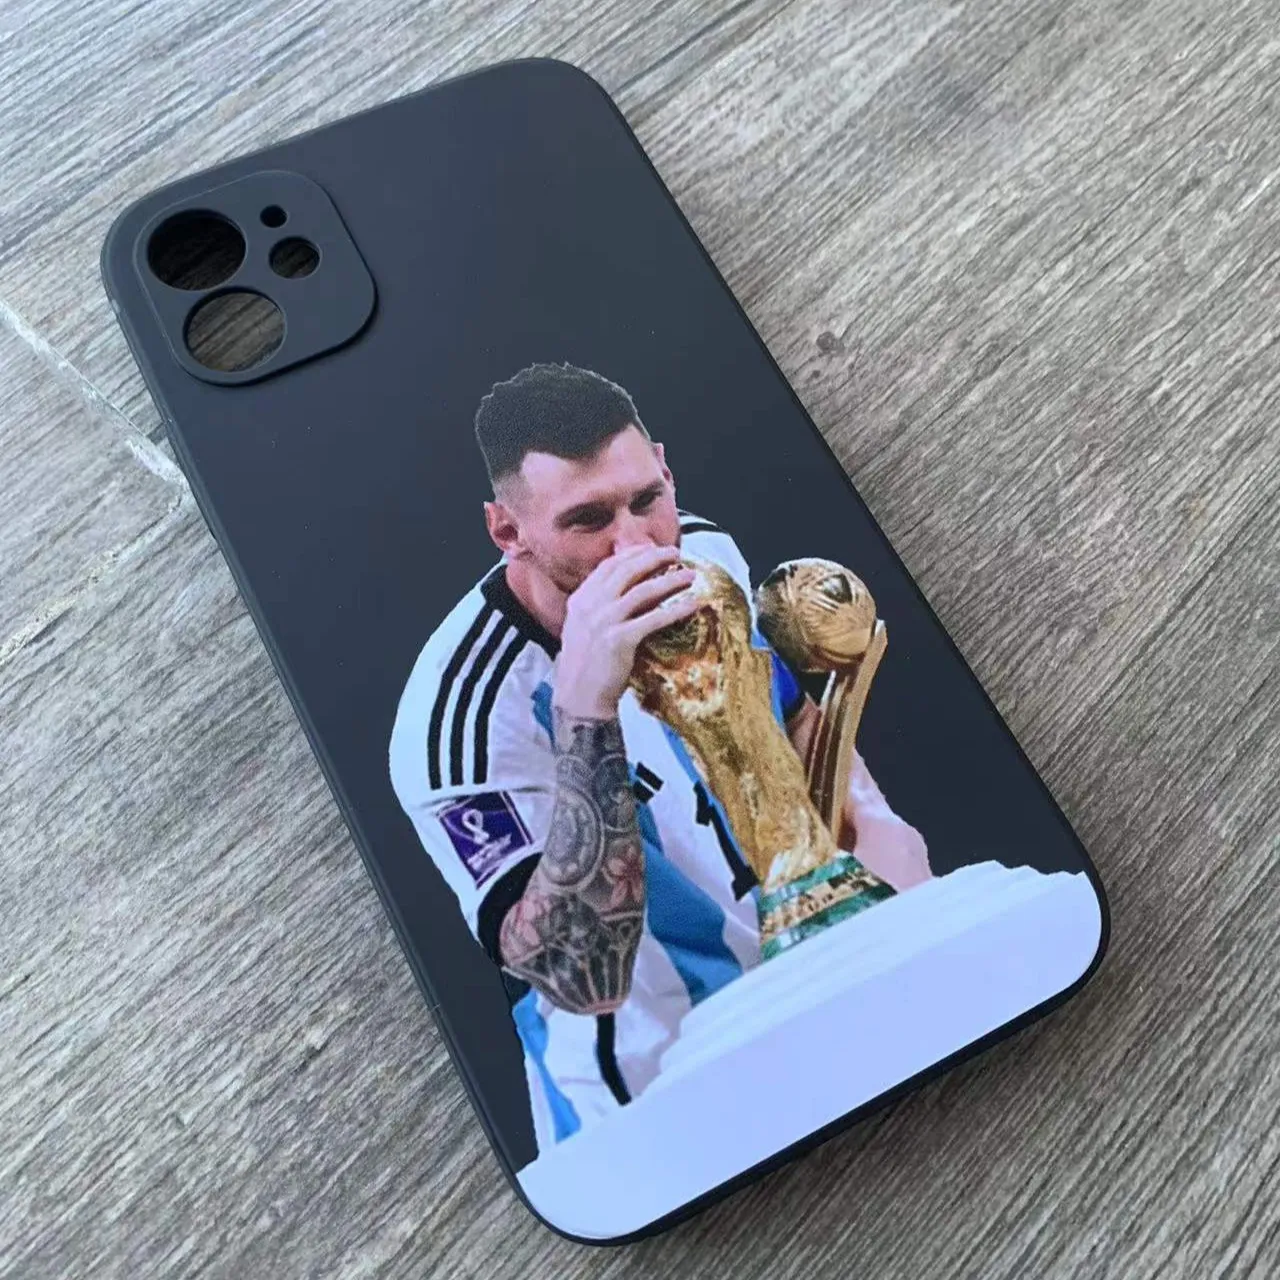 Football Star M-Messis Messi kisses the World Cup Phone Case For iPhone 11 12 Mini 13 14 Pro Max XR X Liquid Silicone Cover Case